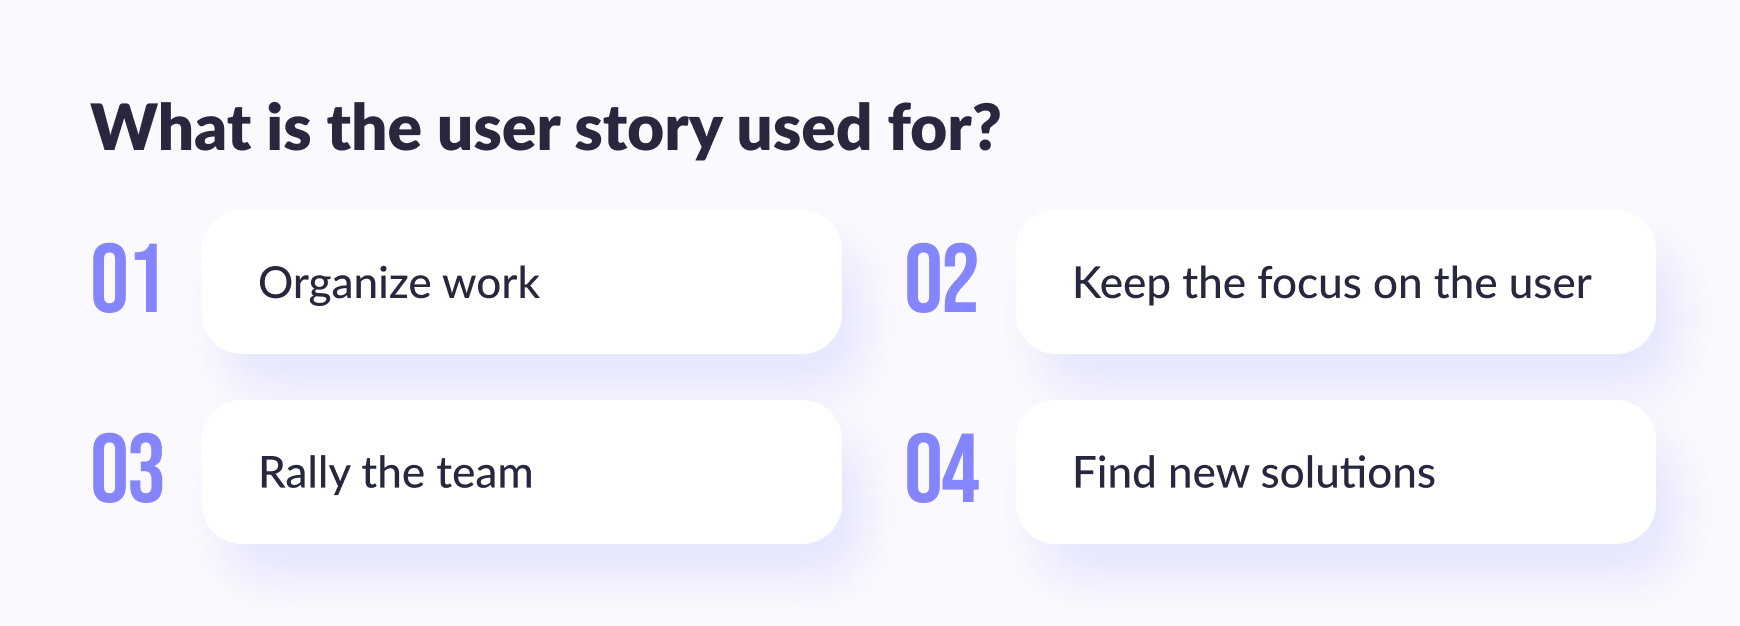 What is user story used for